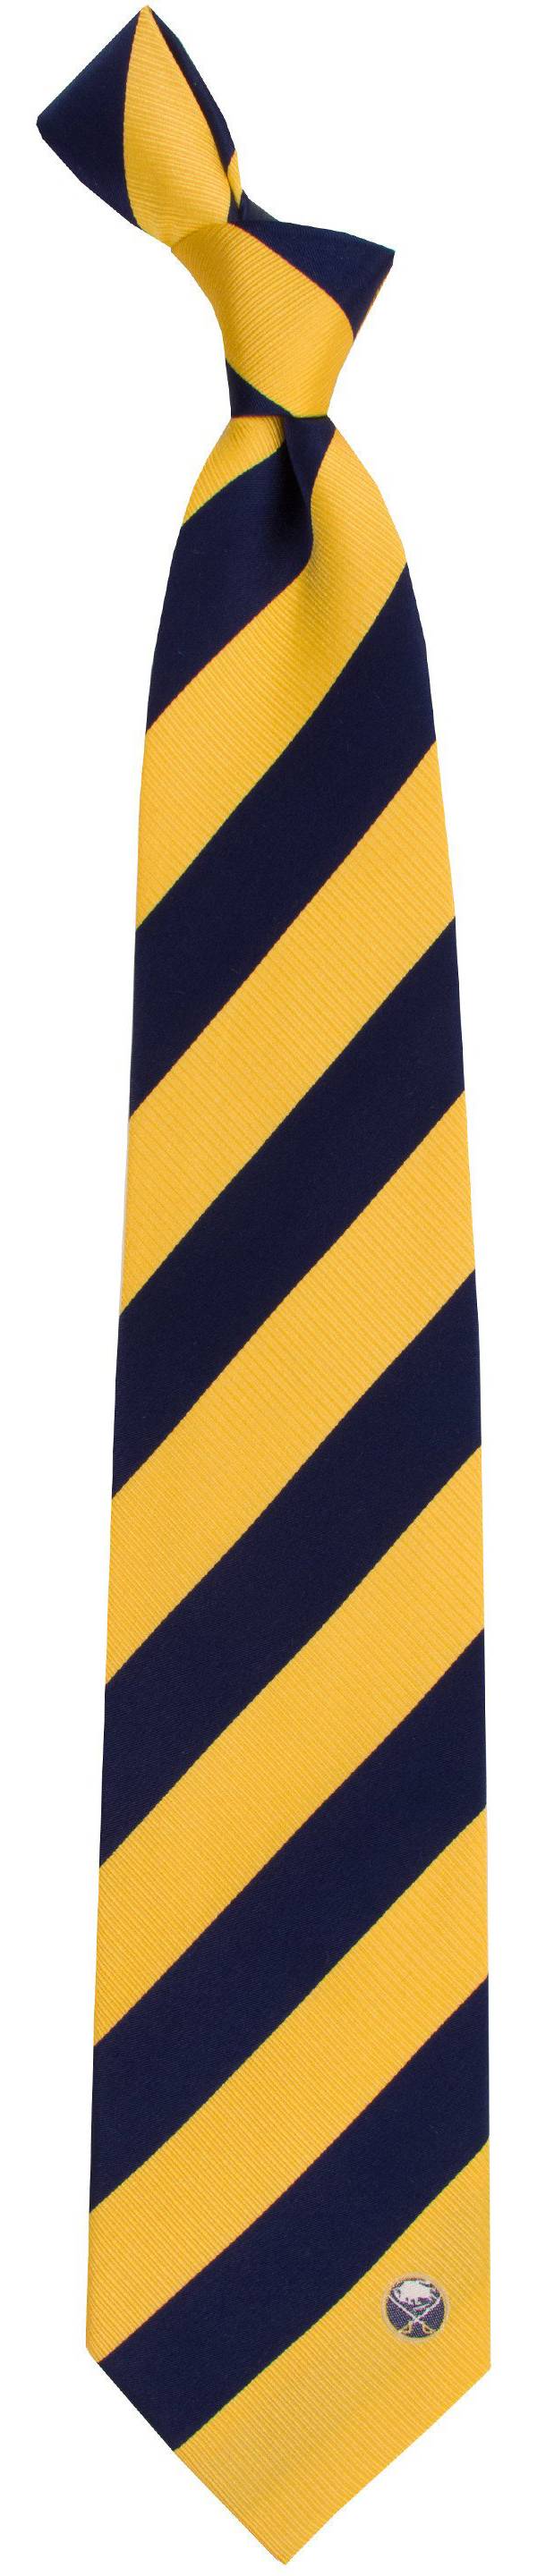 Eagles Wings Buffalo Sabres Woven Silk Necktie product image